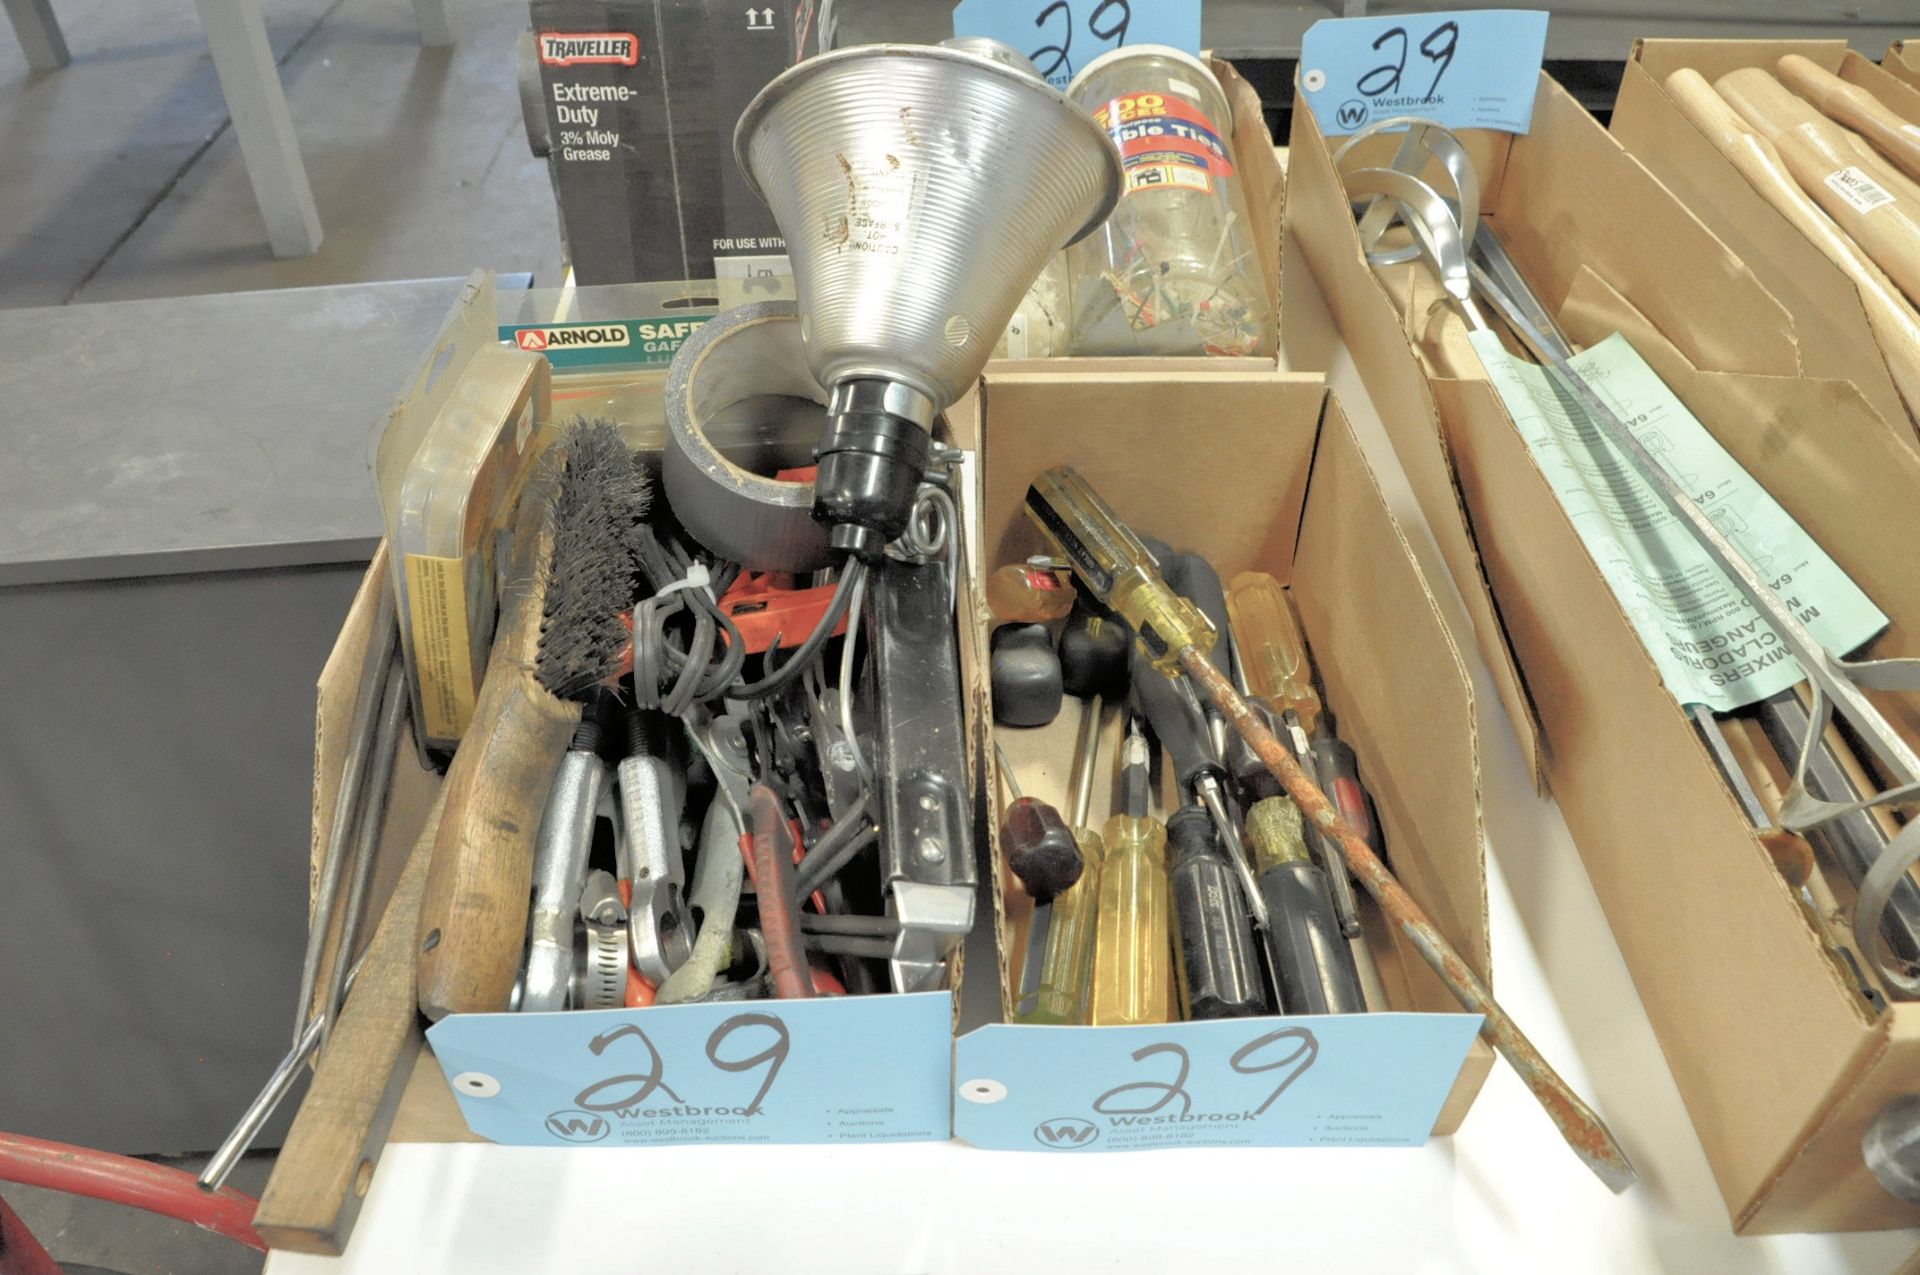 Lot-Mallets, Paint Mixer Attachments, Screwdrivers, Magnet, Cable Ties, etc. in (9) Boxes - Image 4 of 7